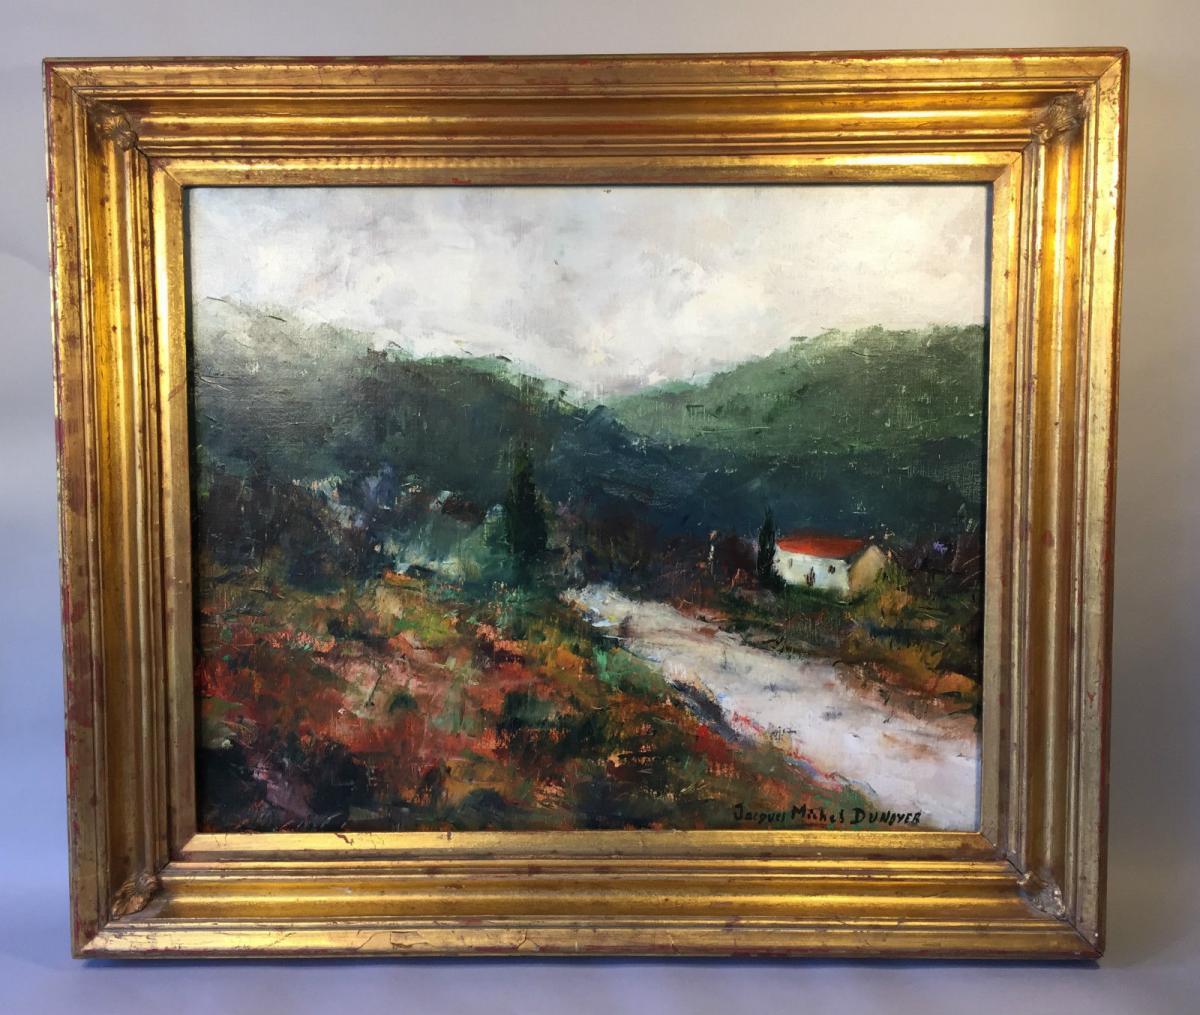 Painting / Oil On Canvas Of "j. Dunoyer 1933/2000" In St. Paul De Vence